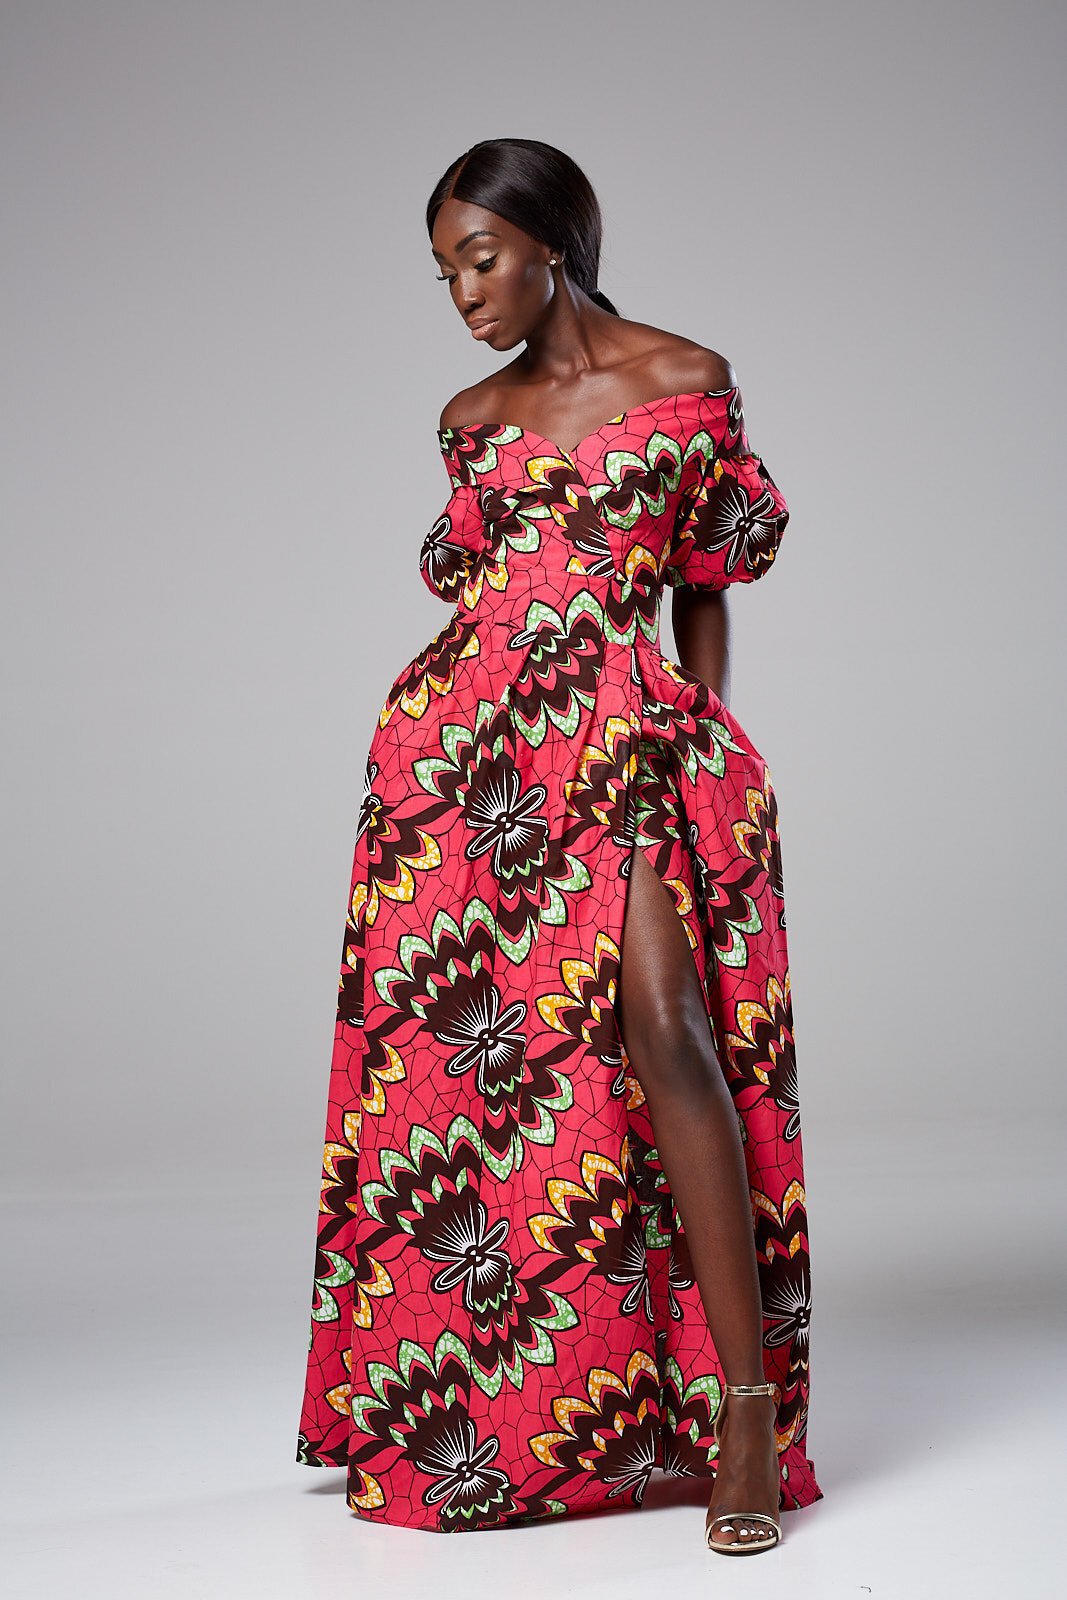 A roundup of the best African print dresses to add to your wardrobe this year. Wear these ankara dress styles to traditional weddings, prom dates, and religious ceremonies. Get details about each African attire to nail your African print fashion today. Click to see all! All about ankara Dutch wax, Kente, Kitenge, Dashiki. Africa fashion, African wear, African clothing. #africanprint #ankarastyles #africanfashion